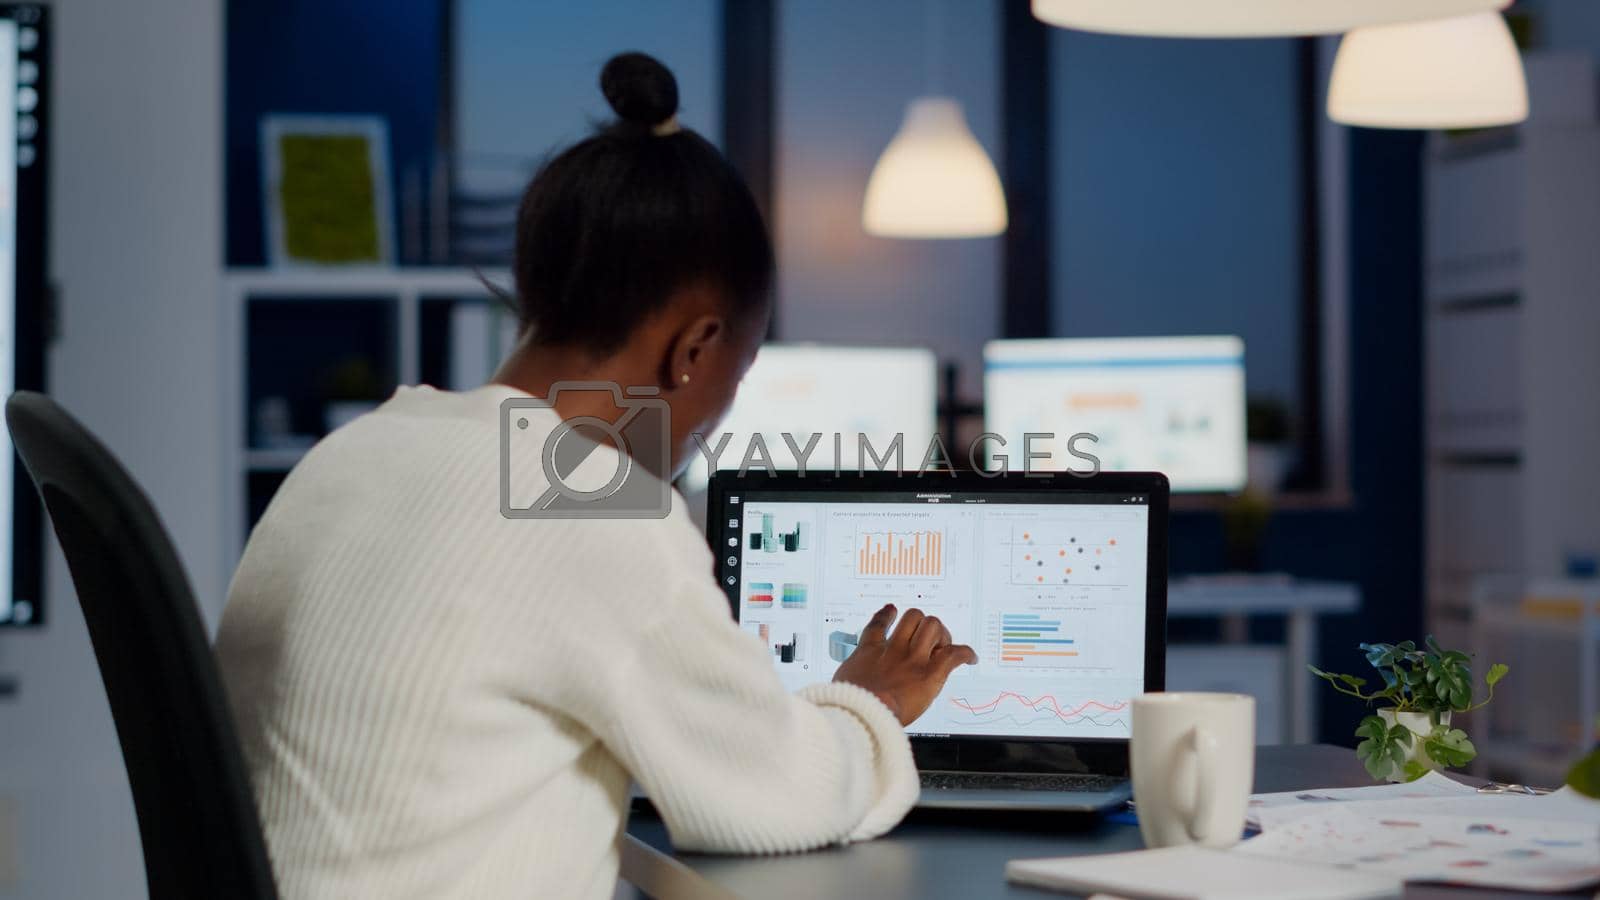 Black woman manager checking business statistics and financial reports on laptop working in start up office late at night. Focused employee doing overtime for job respecting deadline of project